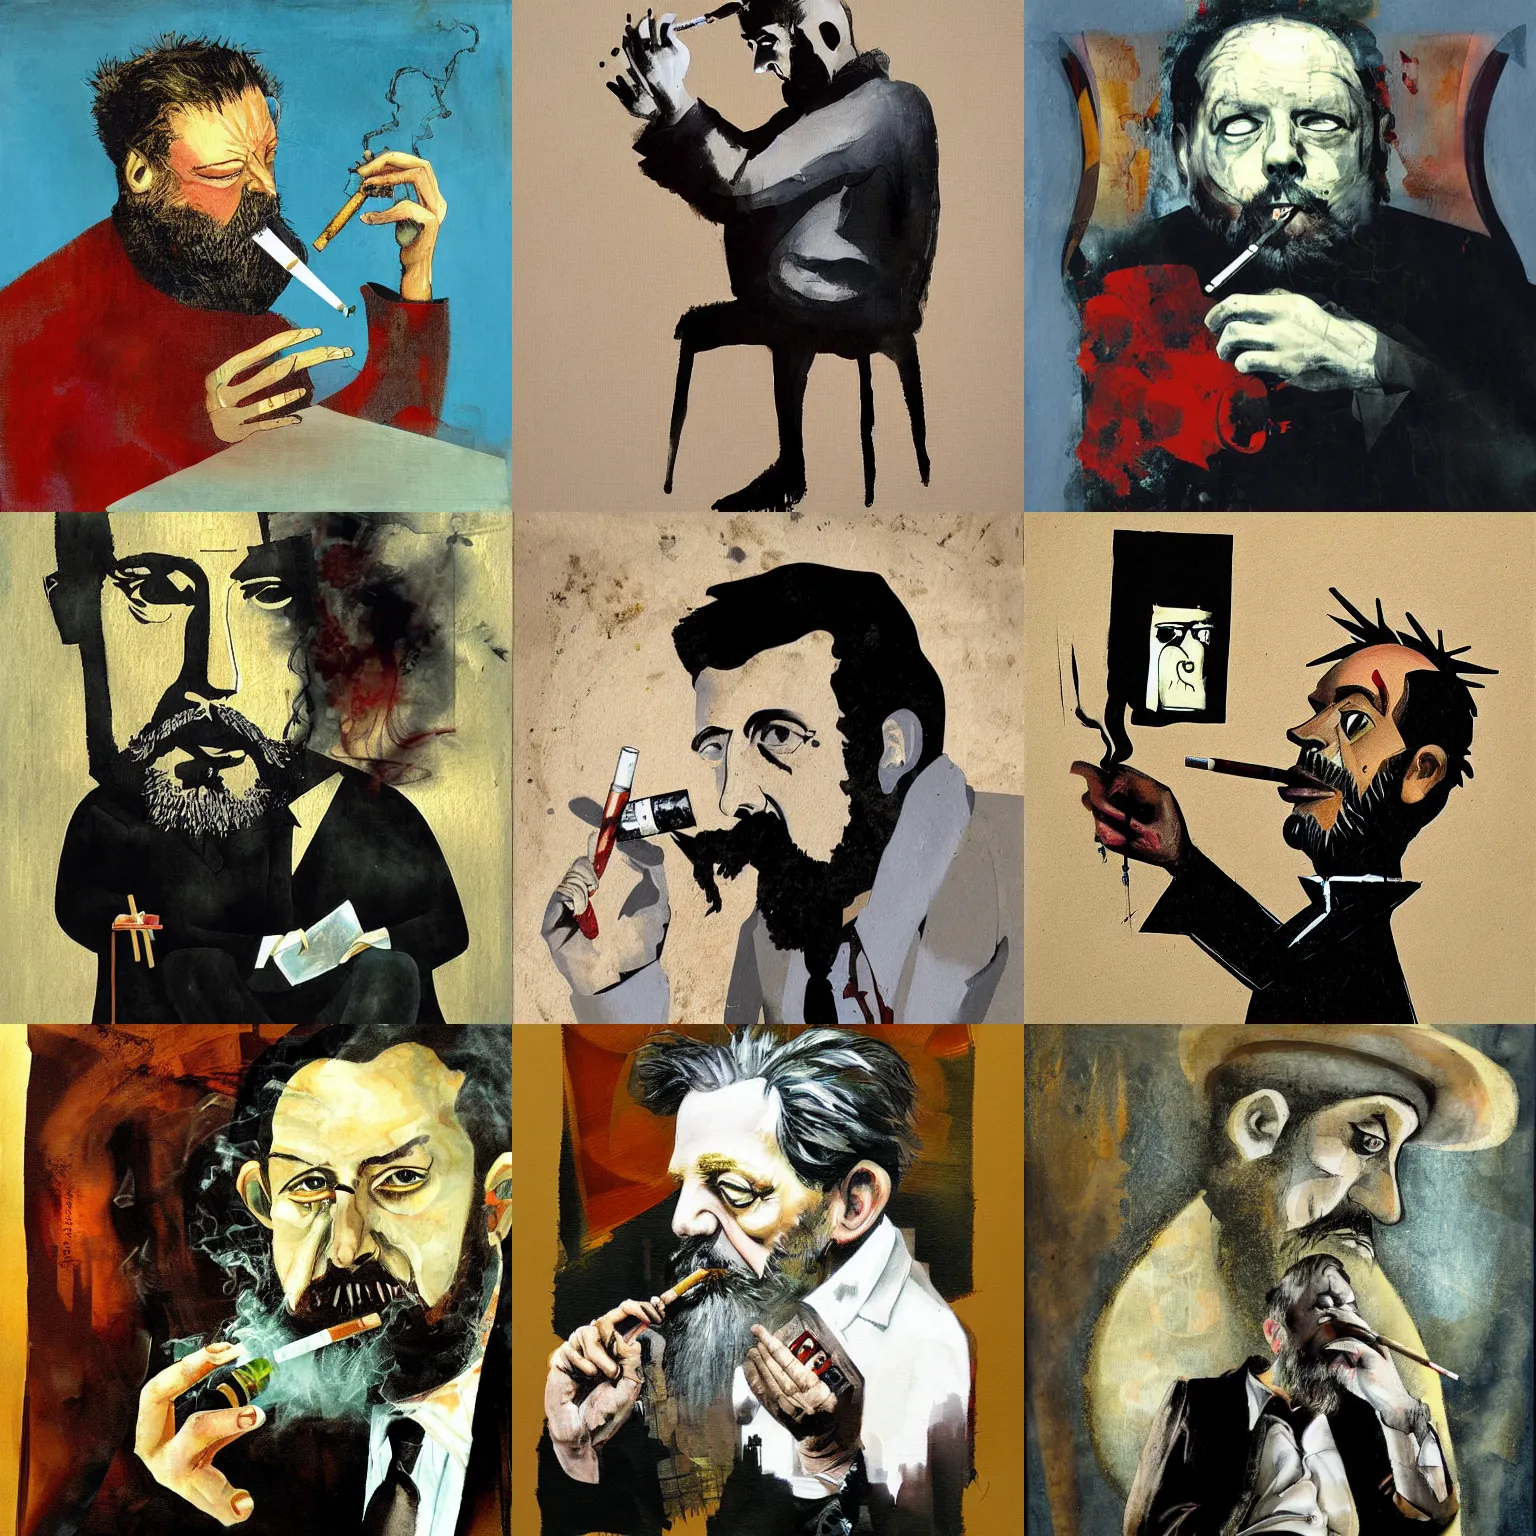 Prompt: Dave McKean painting of a writer with a beard sitting, he is smoking a cigarette, he is holding a bottle in his other hand